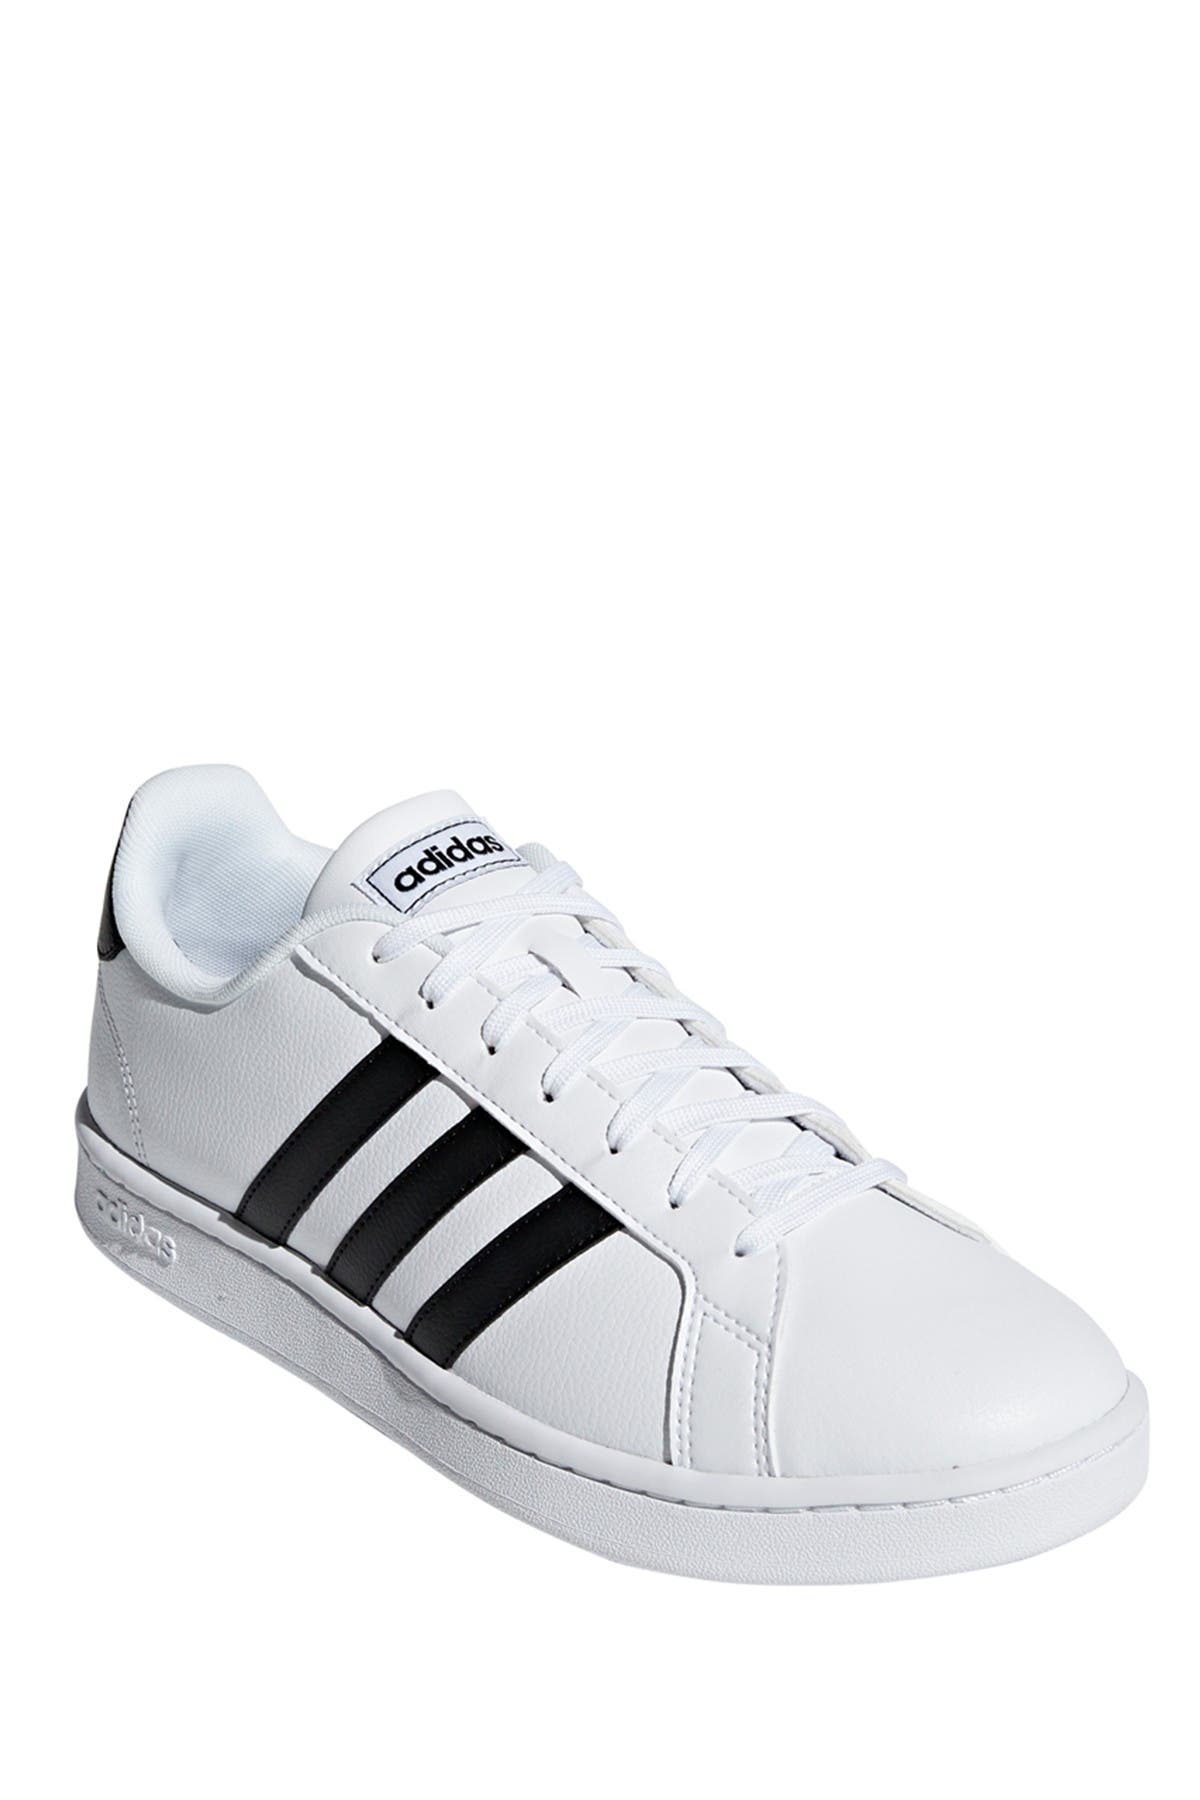 adidas sneakers grand court Off 57% - www.bashhguidelines.org